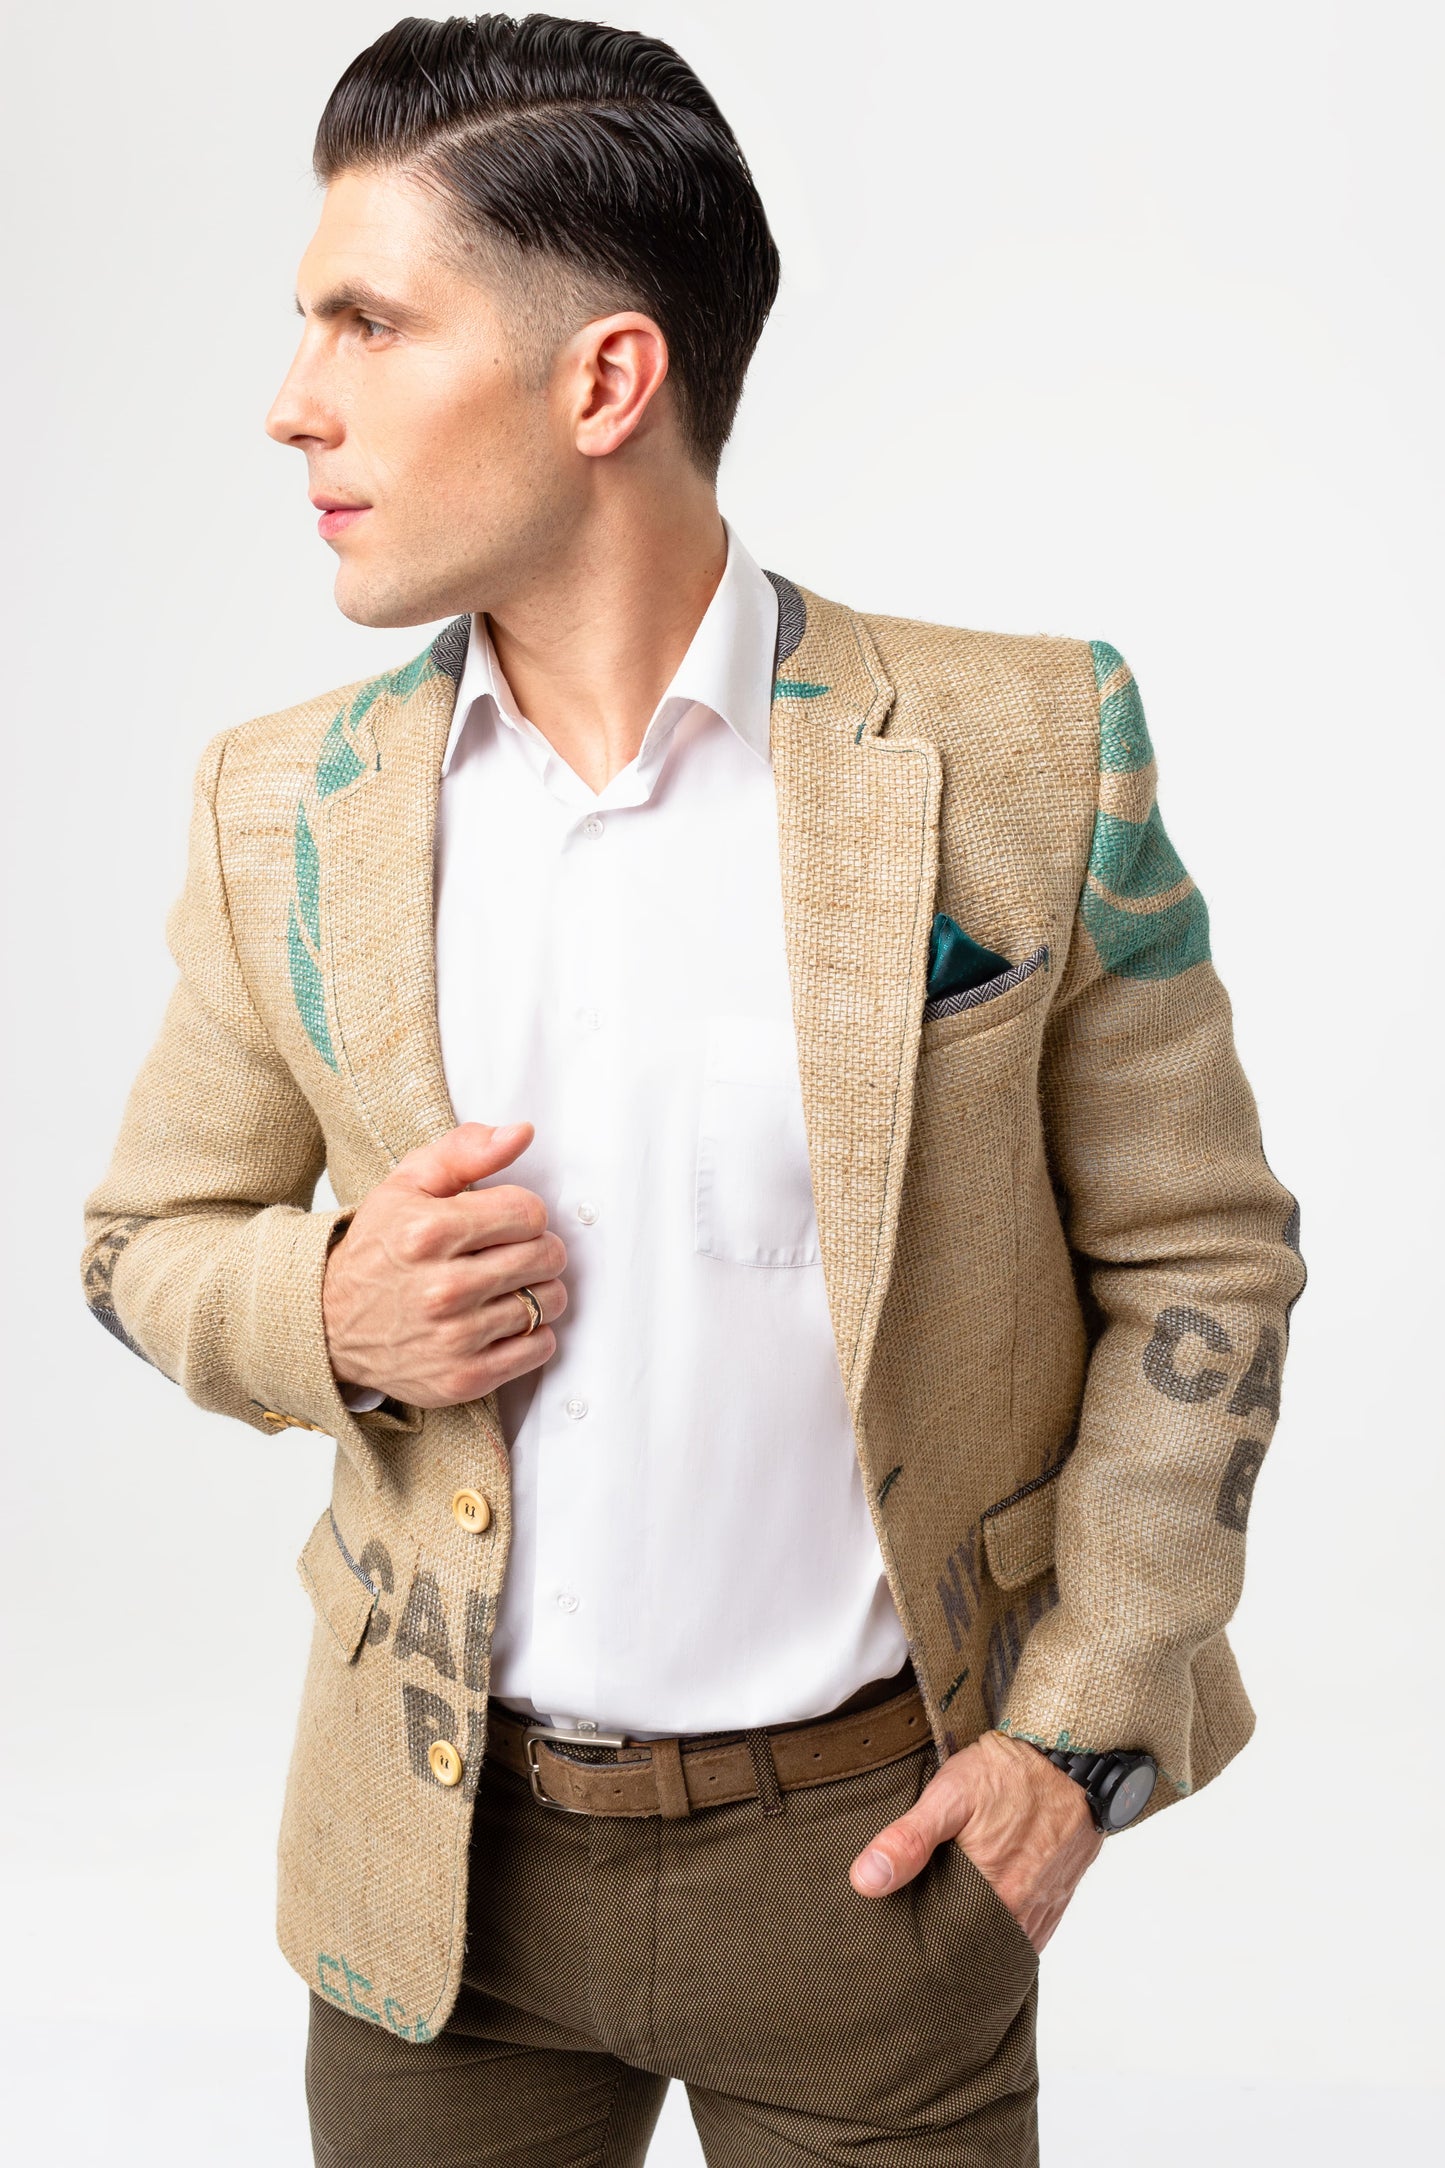 An exceptional upcycled luxury clothing for men from sustainable fashion brand THE COFFEE JACKET®